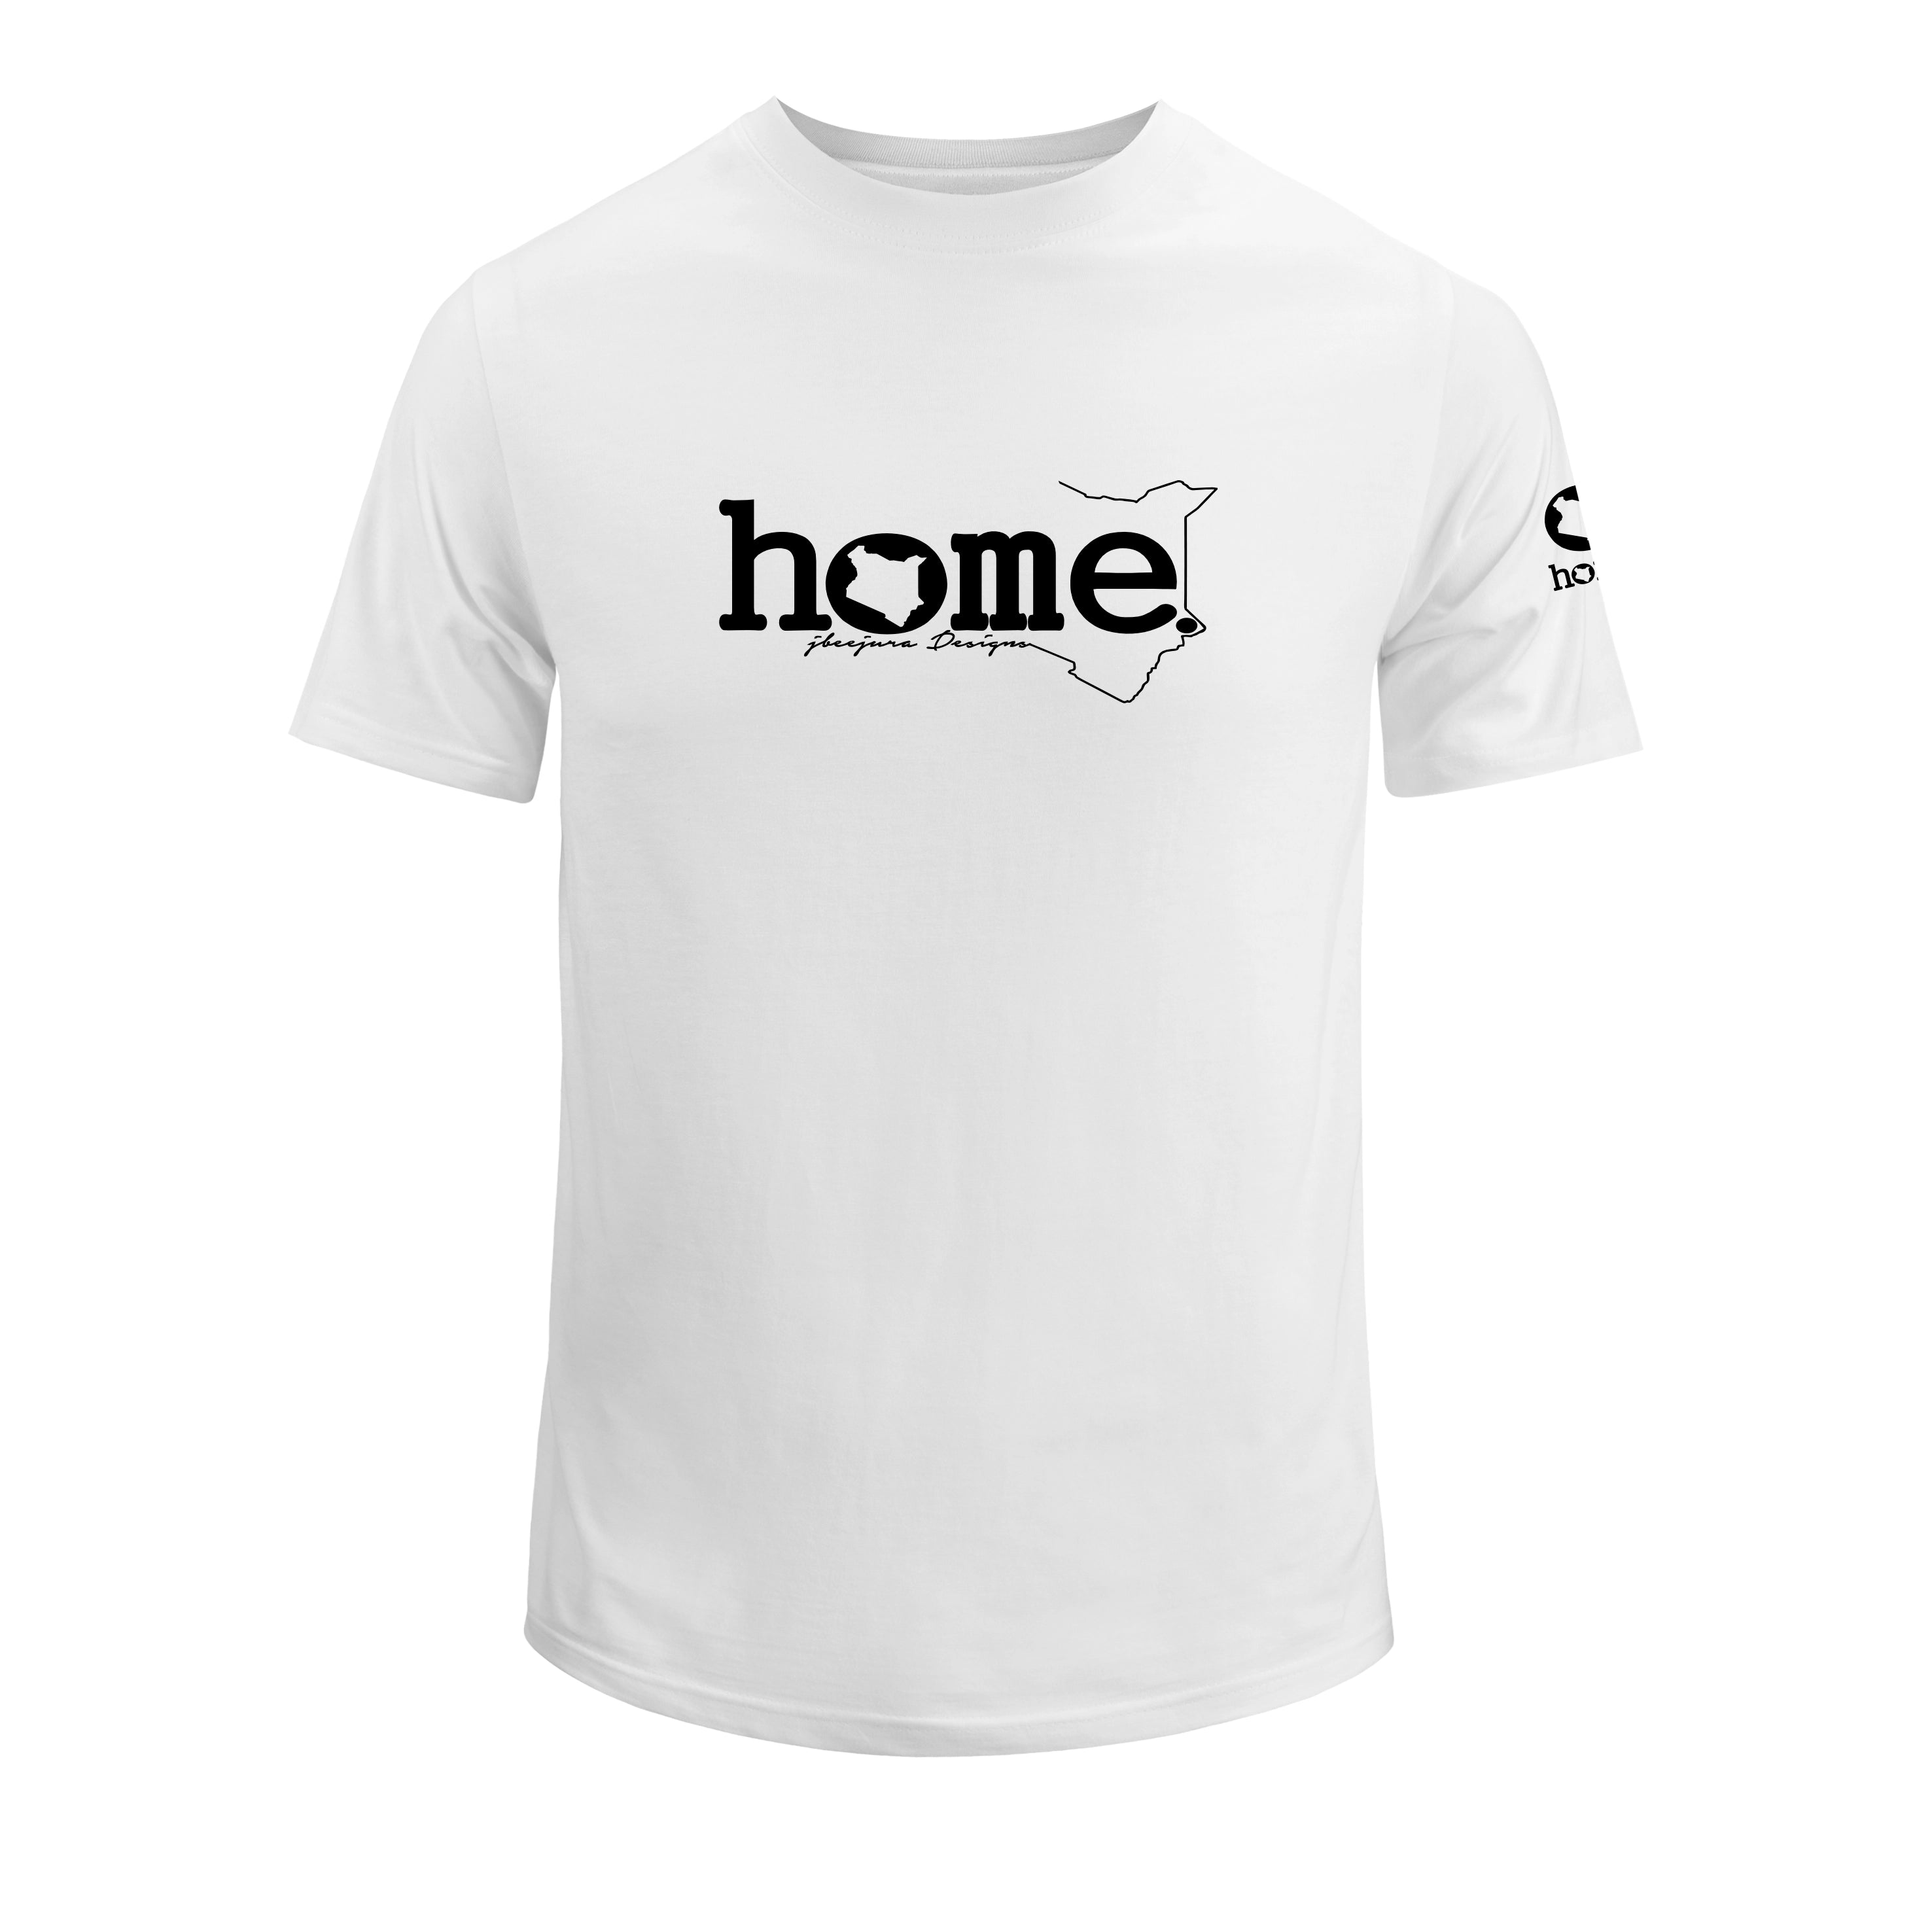 home_254 SHORT-SLEEVED WHITE T-SHIRT WITH A BLACK CLASSIC WORDS PRINT – COTTON PLUS FABRIC